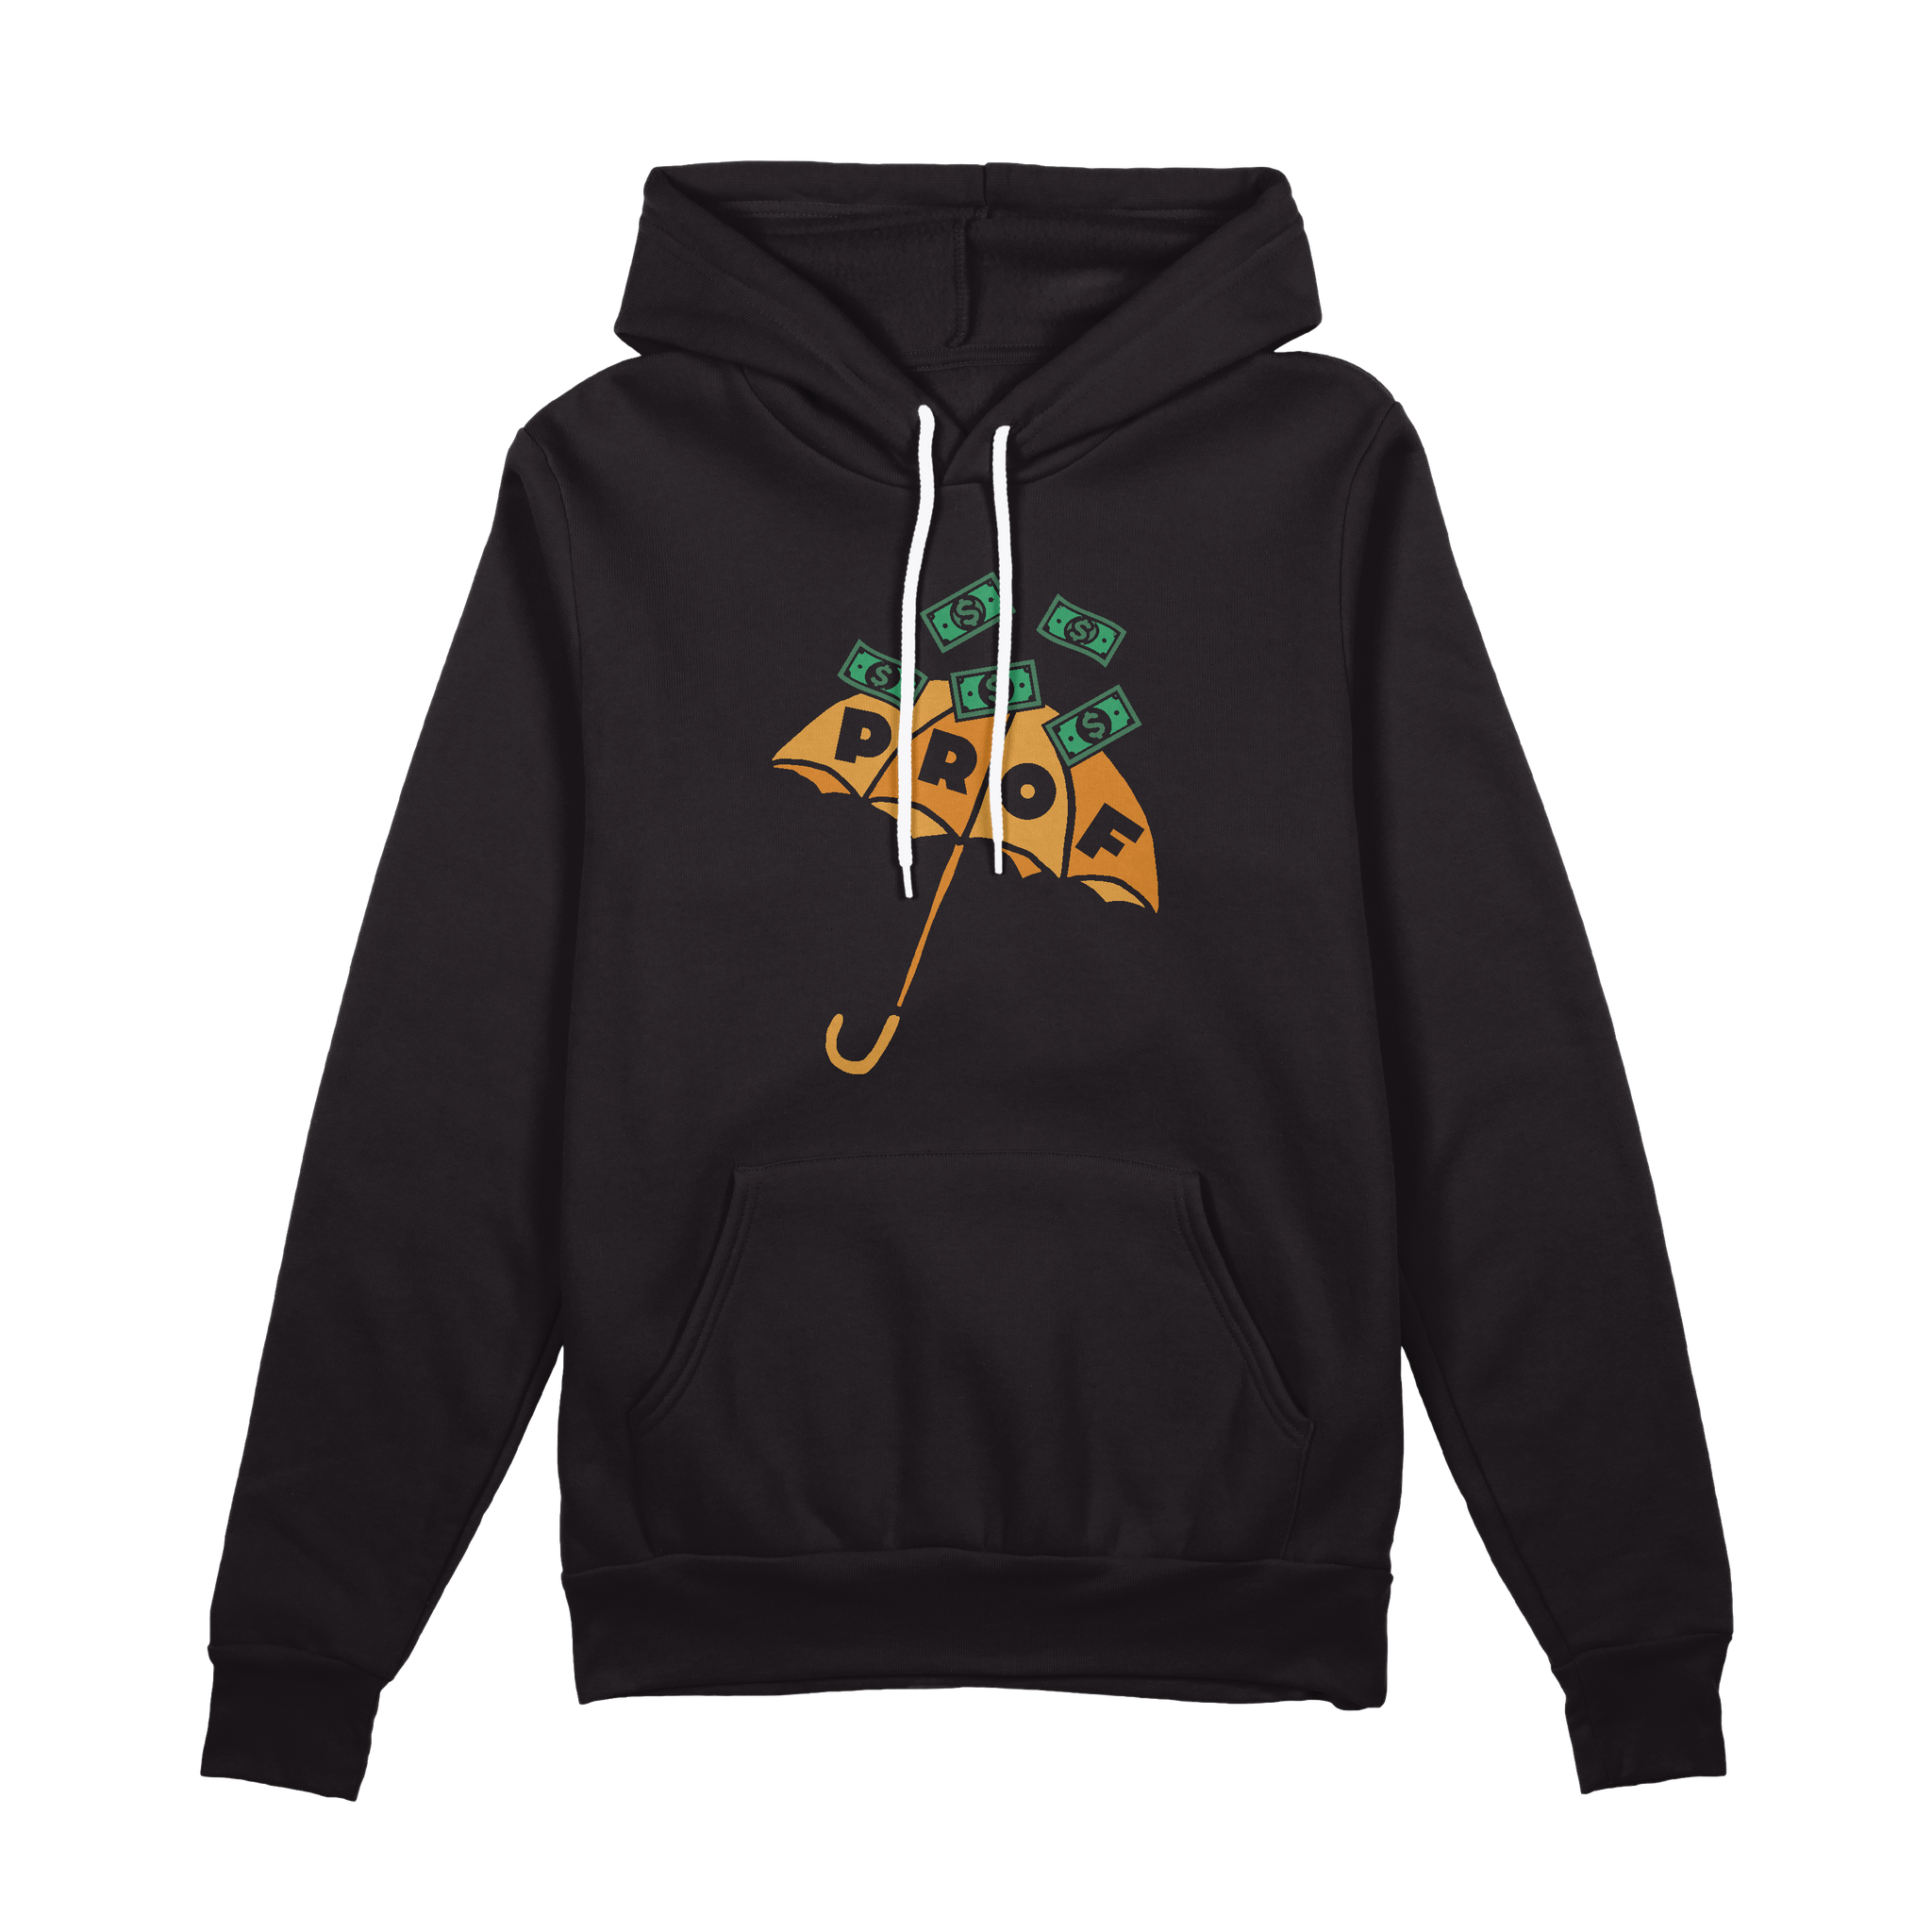 PROF "Pay Day" Black Pullover Hoodie